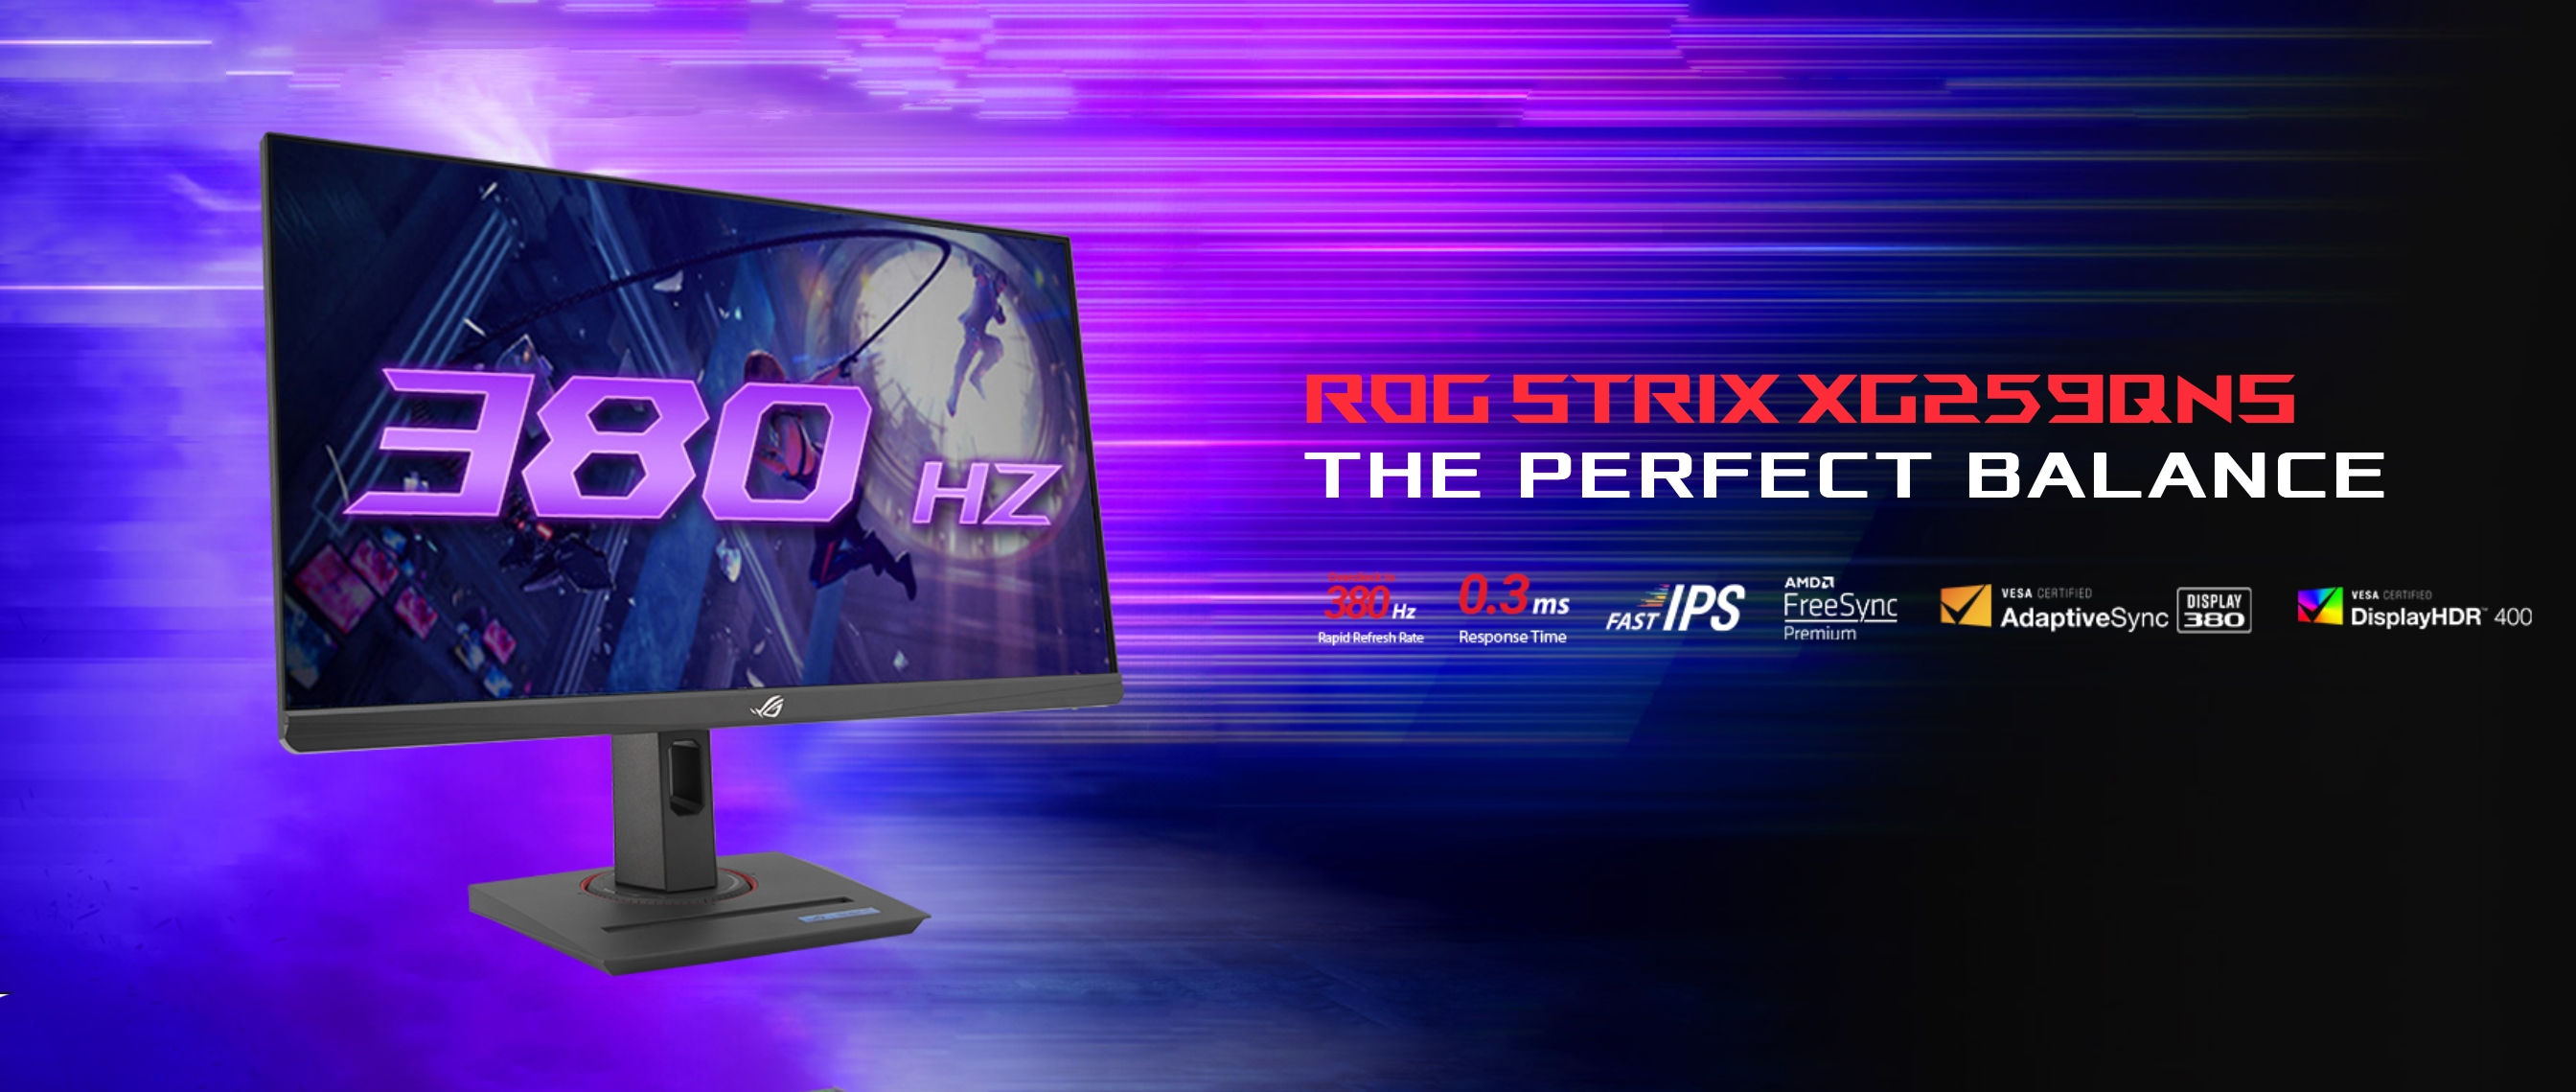 ASUS unveils ROG Strix XG259QNS gaming monitor with 380Hz refresh rate support